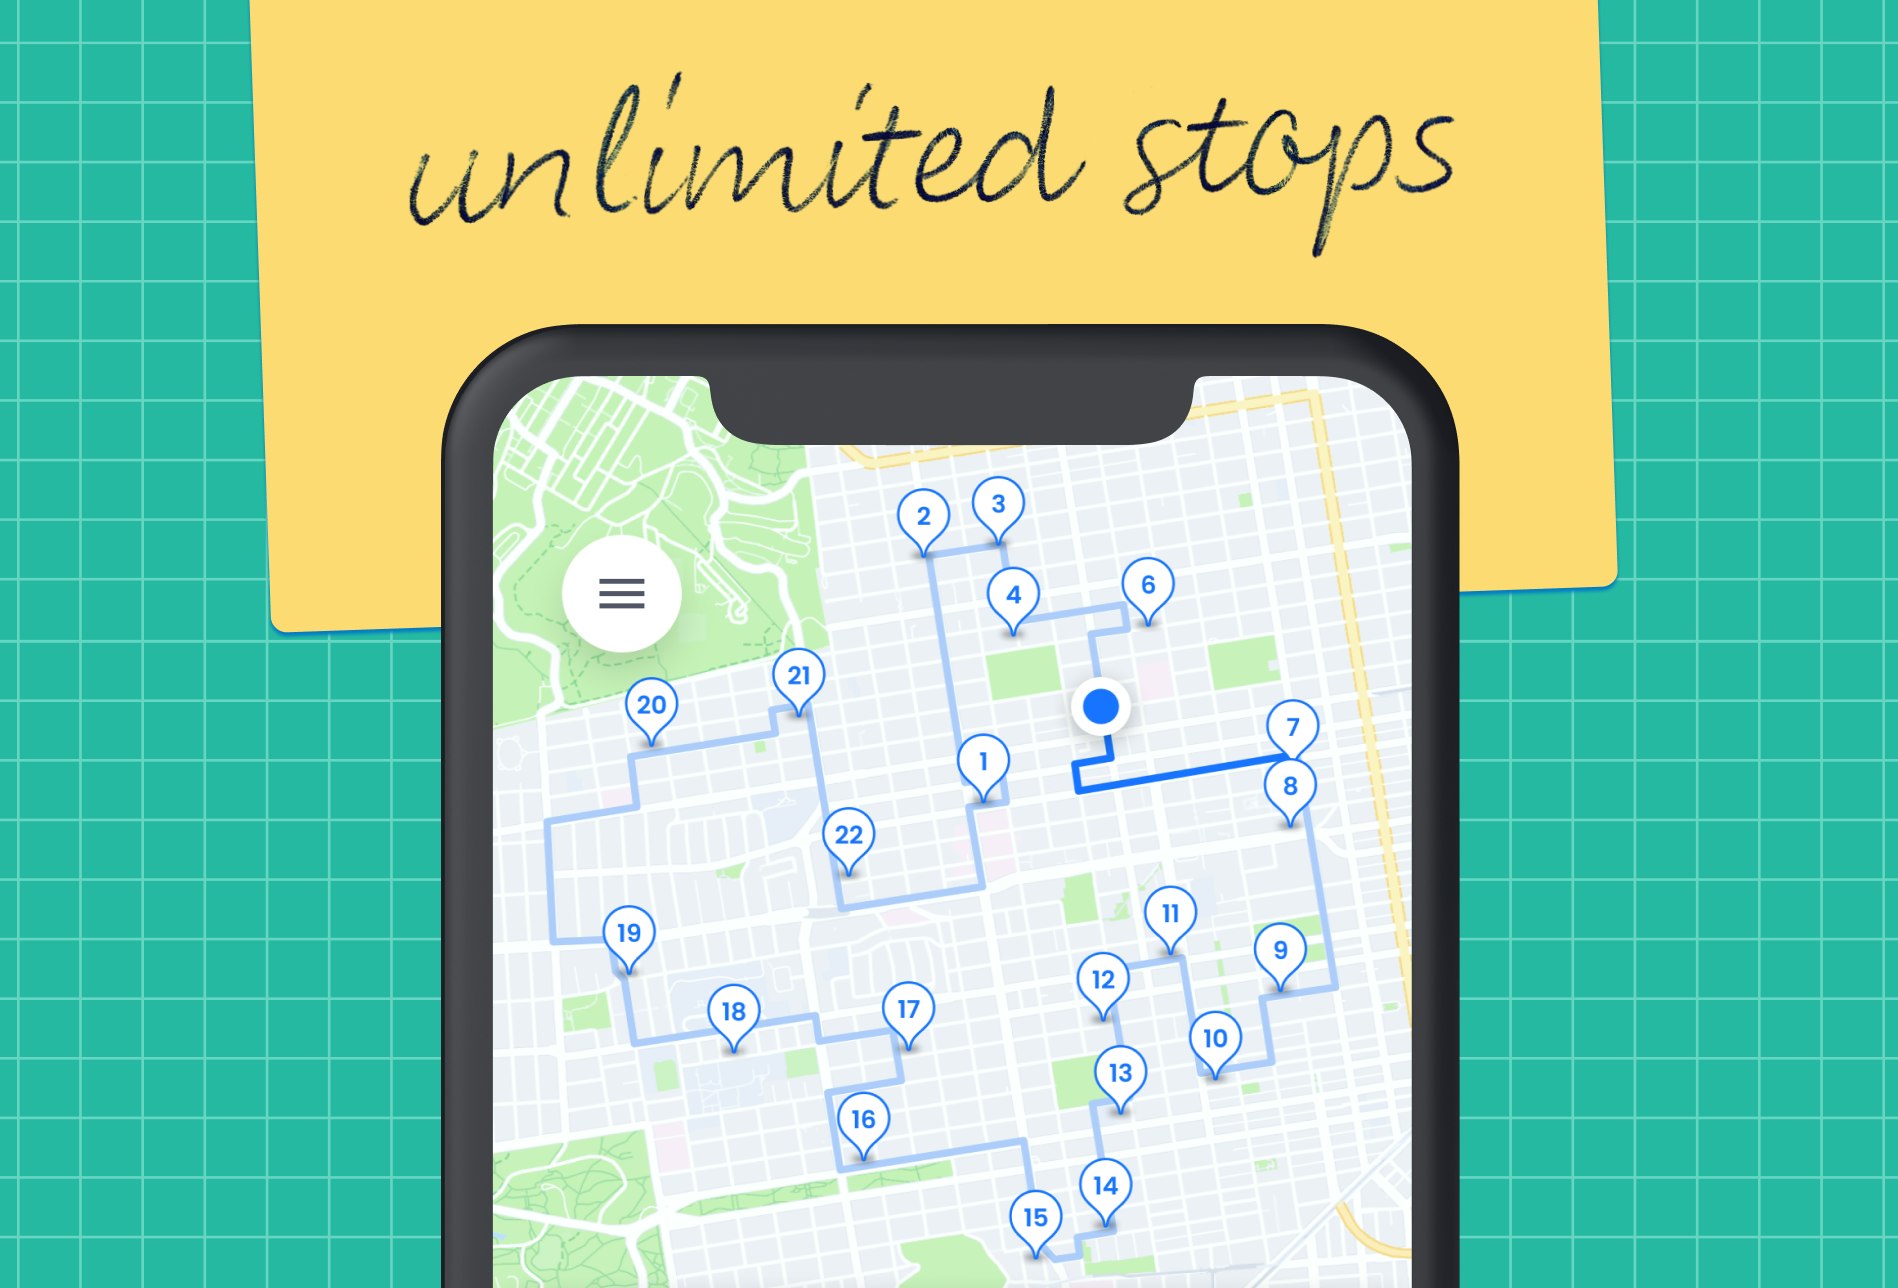 The Best Free Route Planner with Unlimited Stops: Comparing 10 Route Planners